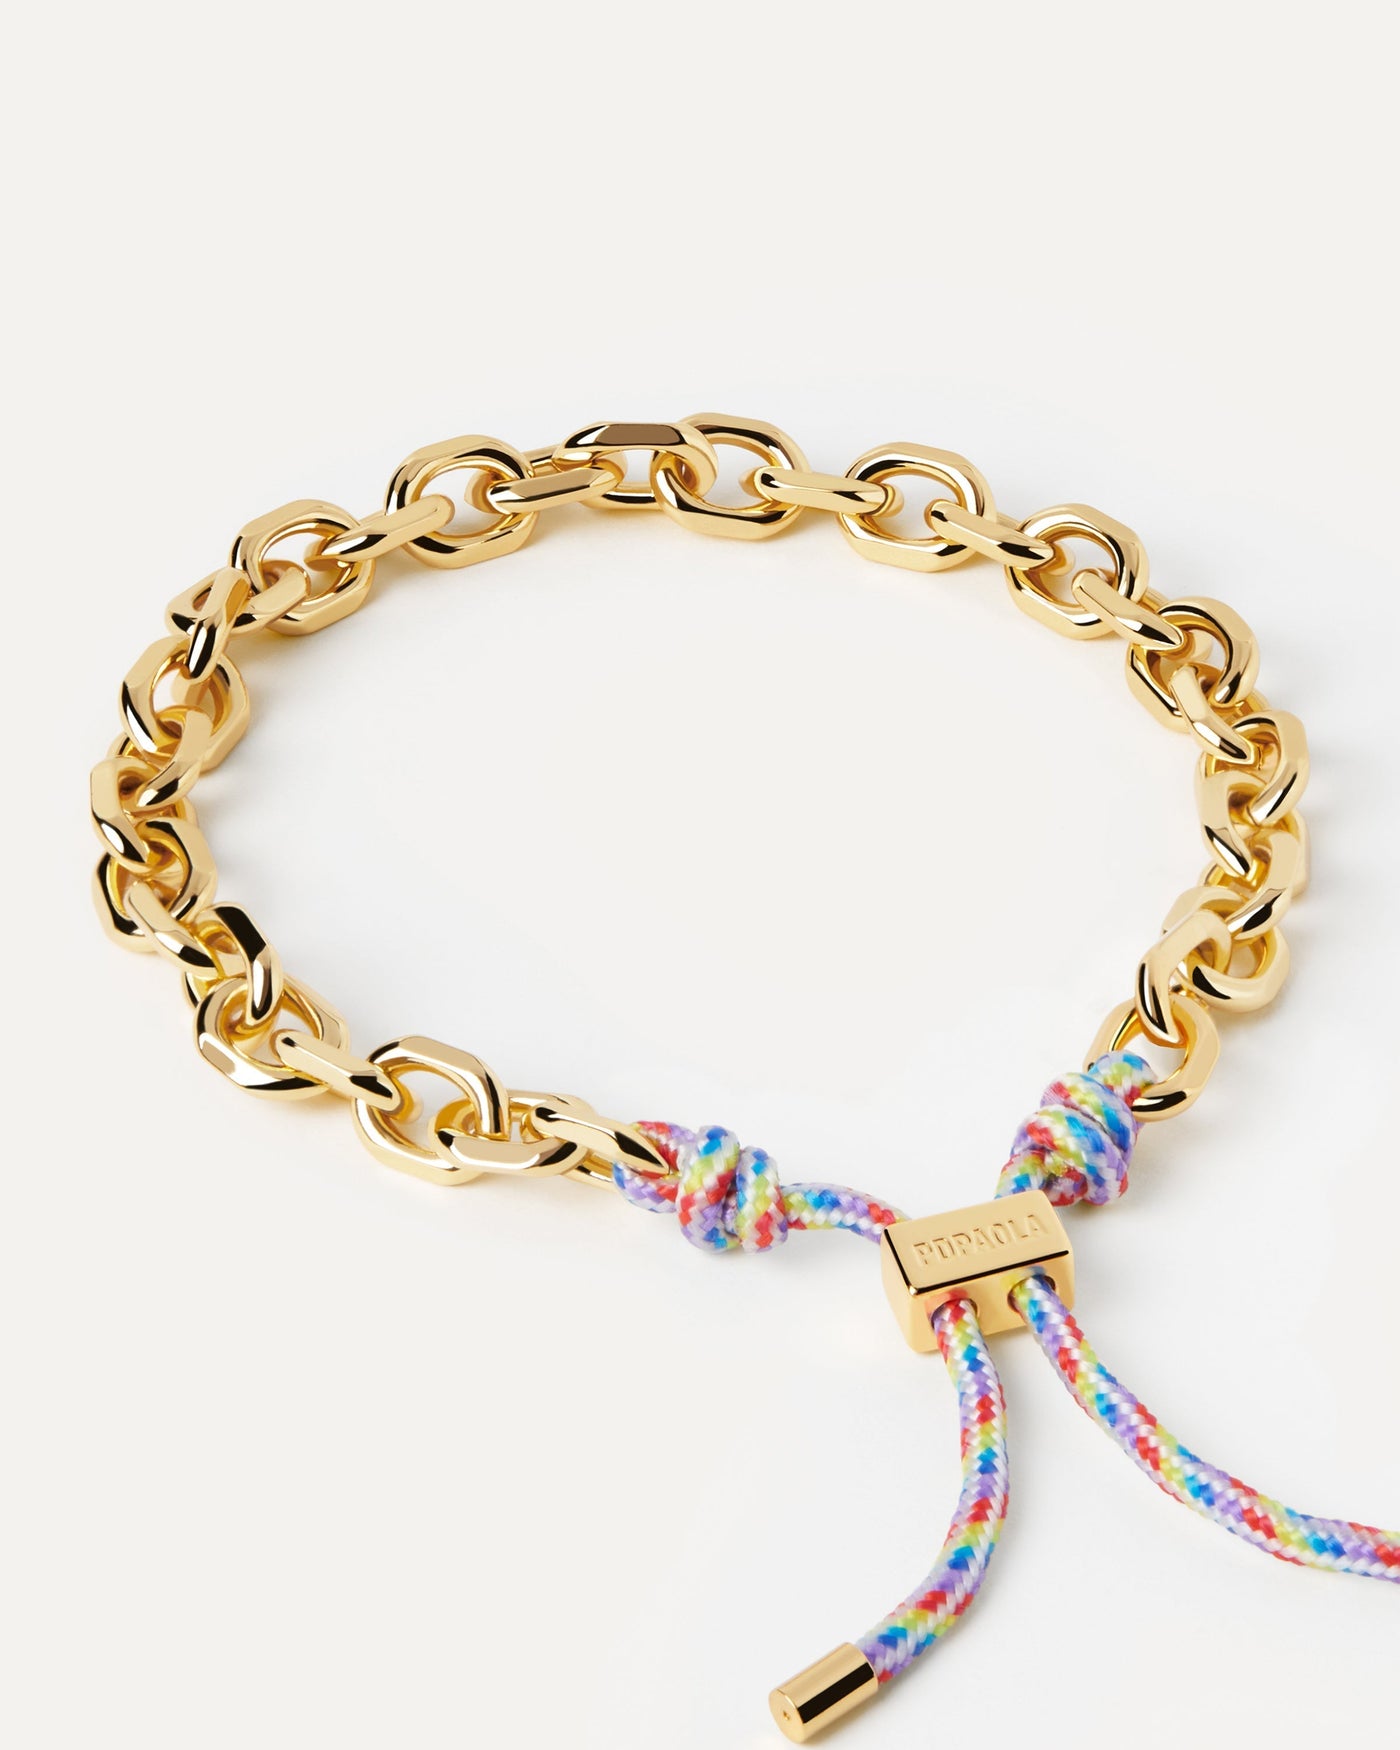 2023 Selection | Prisma Essential Rope and Chain Bracelet. Silver chain bracelet with interwined multicolor rope and adjustable sliding clasp. Get the latest arrival from PDPAOLA. Place your order safely and get this Best Seller. Free Shipping.